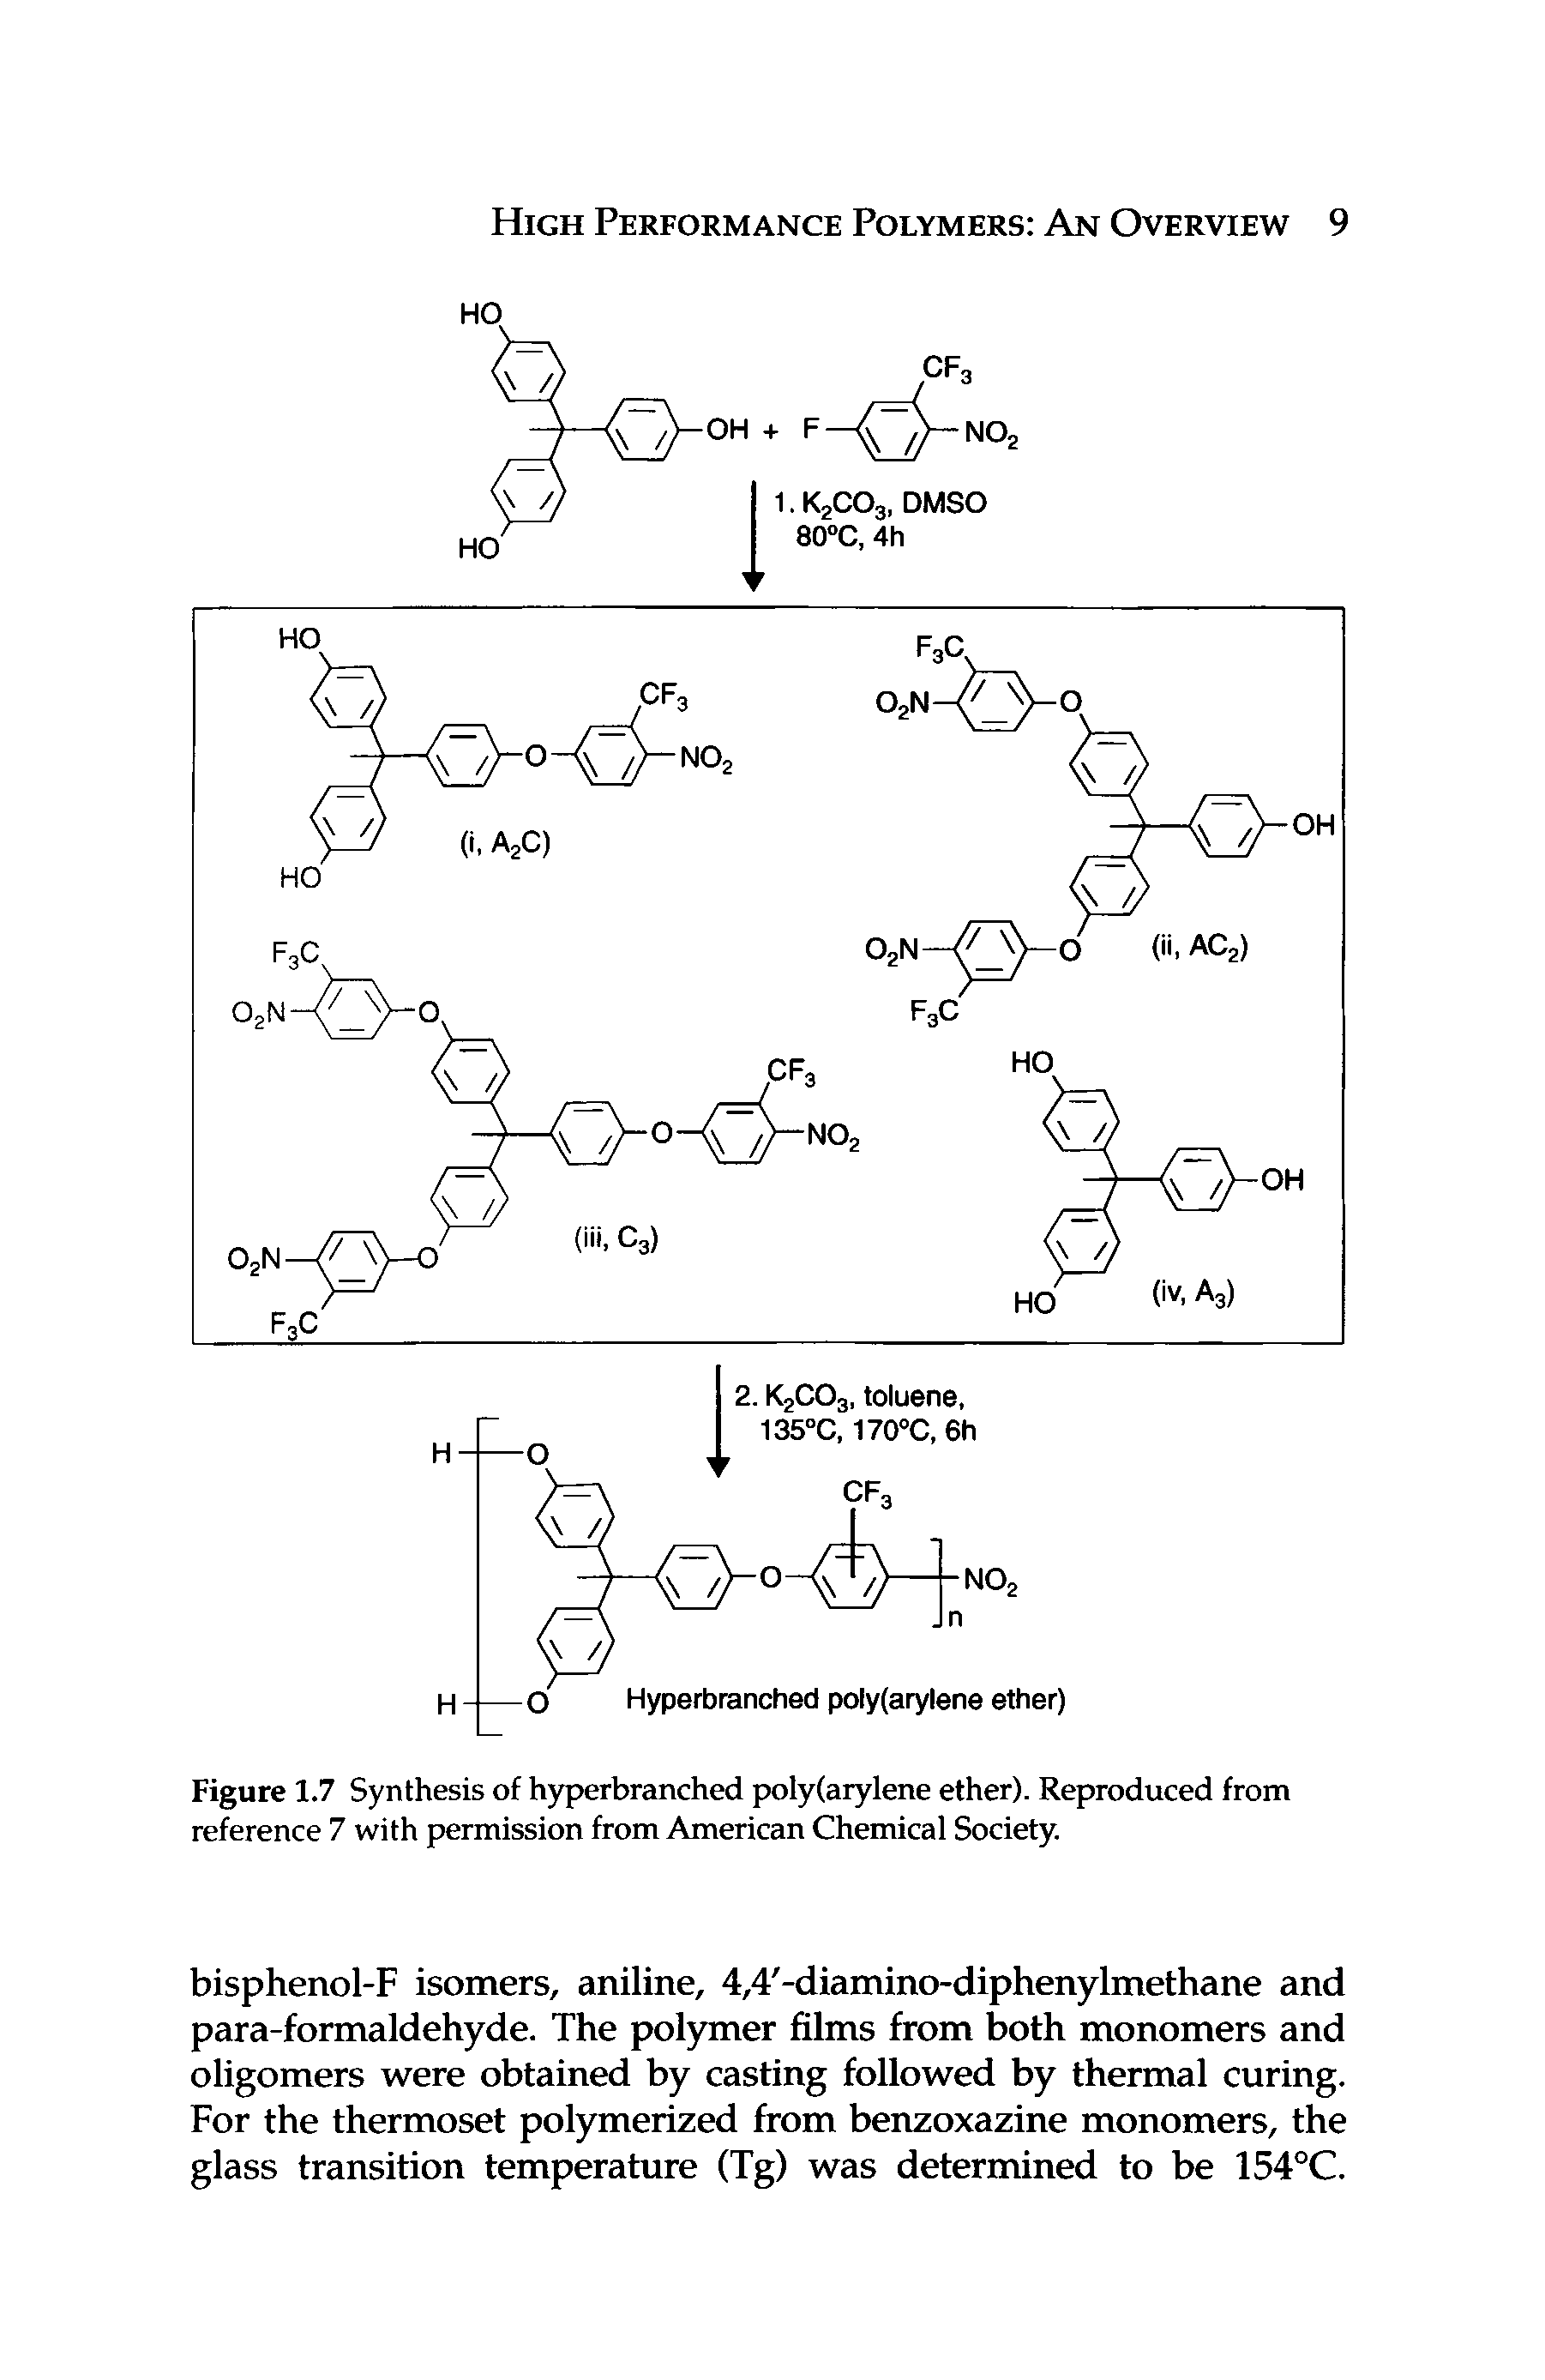 Figure 1.7 Synthesis of h)rperbranched polyfarylene ether). Reproduced from reference 7 with permission from American Chemical Society.